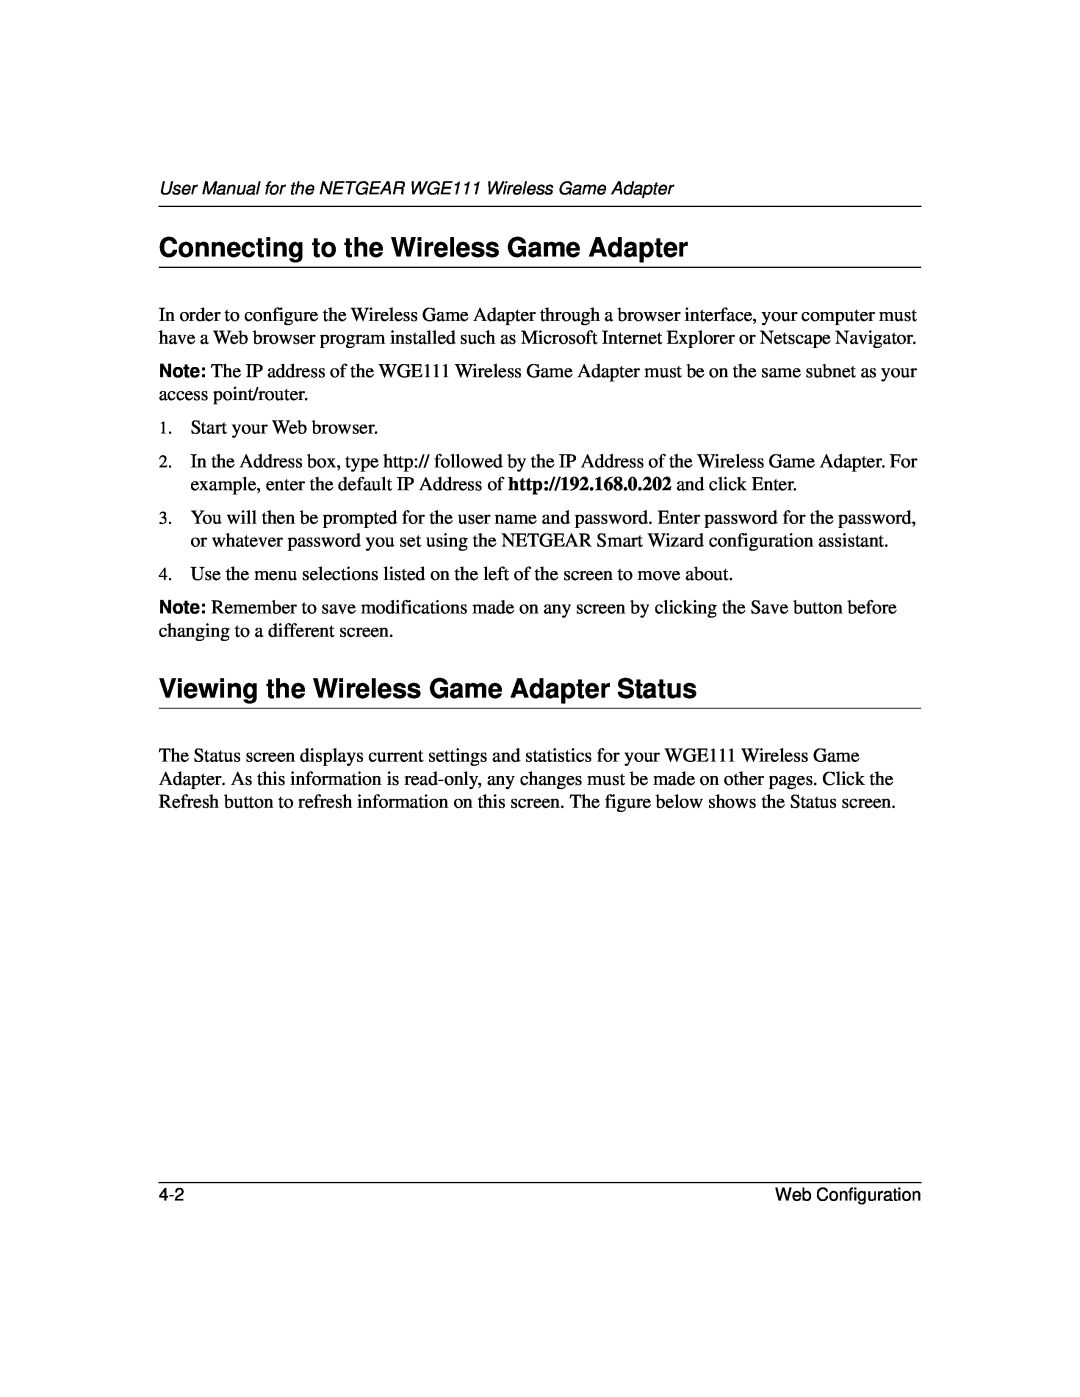 NETGEAR WGE111 user manual Connecting to the Wireless Game Adapter, Viewing the Wireless Game Adapter Status 